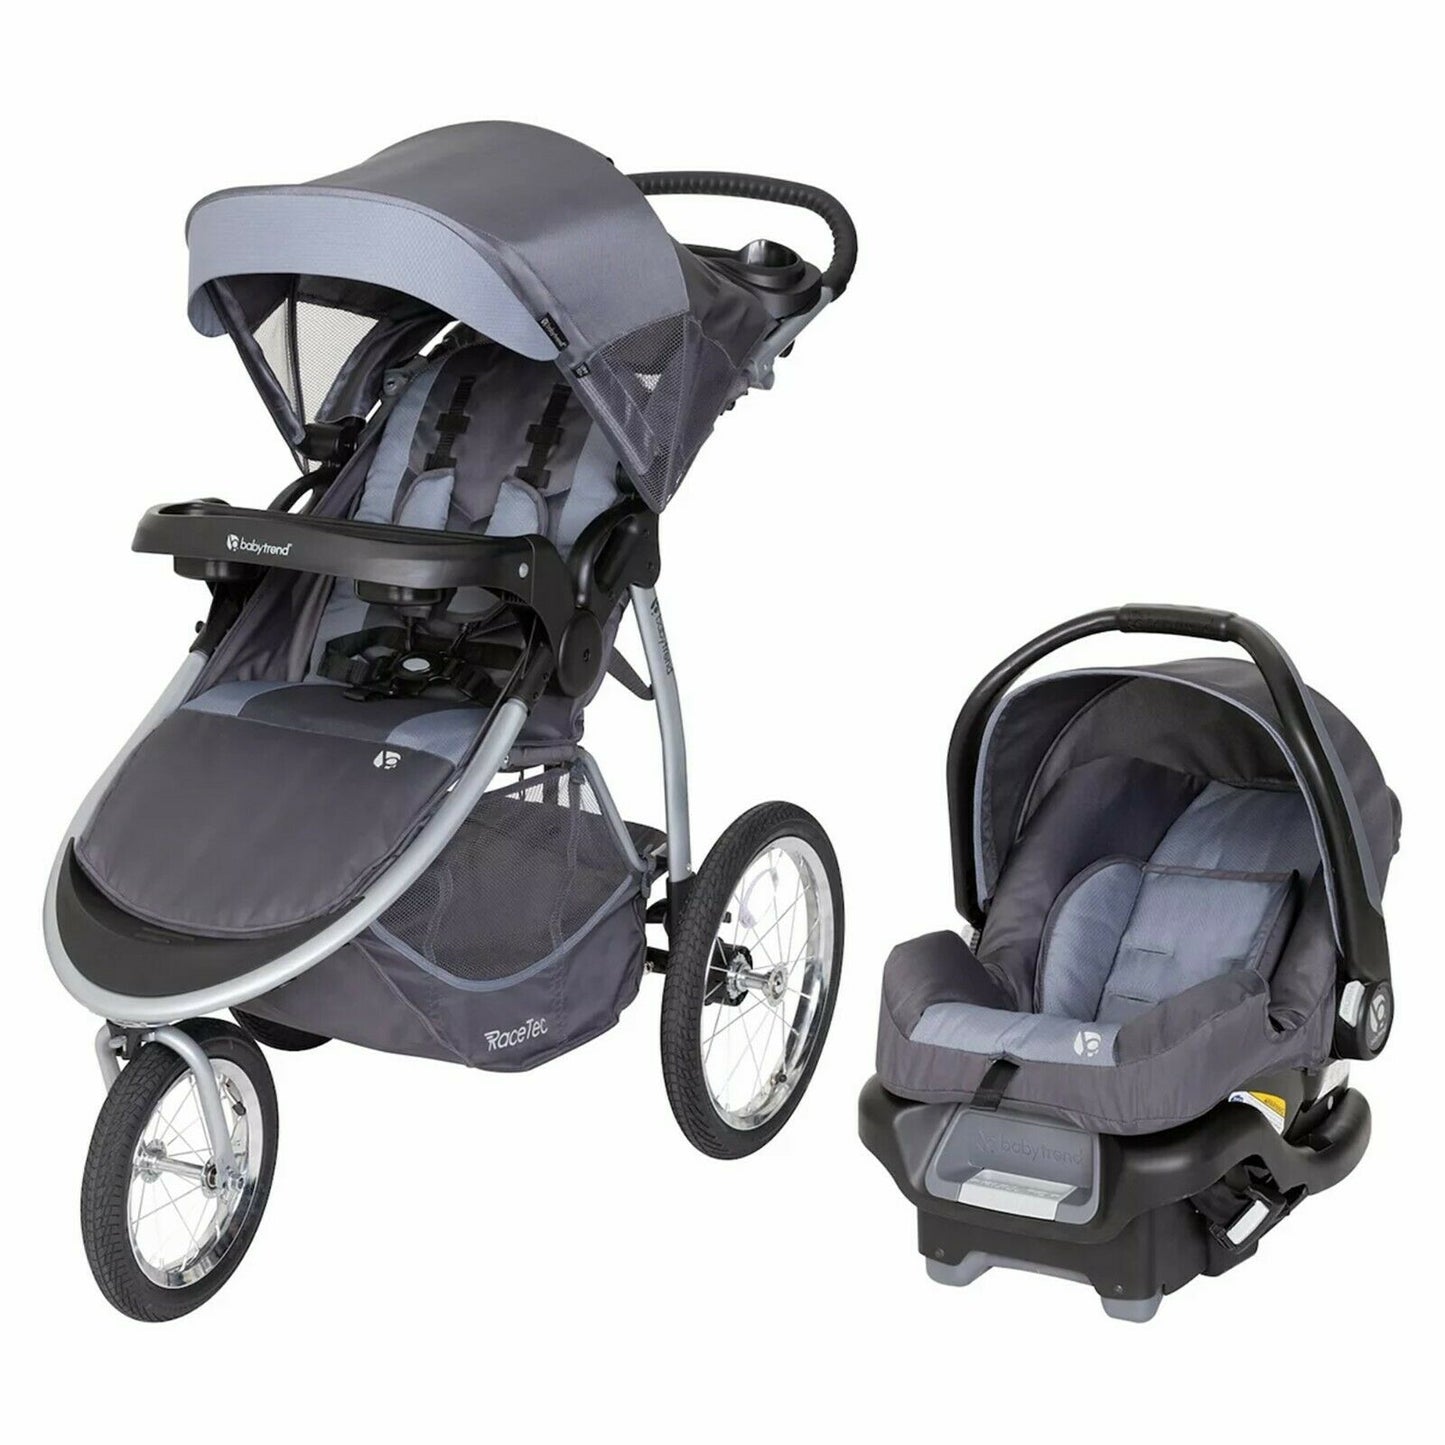 Baby Stroller Travel System with Car Seat High Chair Playard Jogger Combo Set